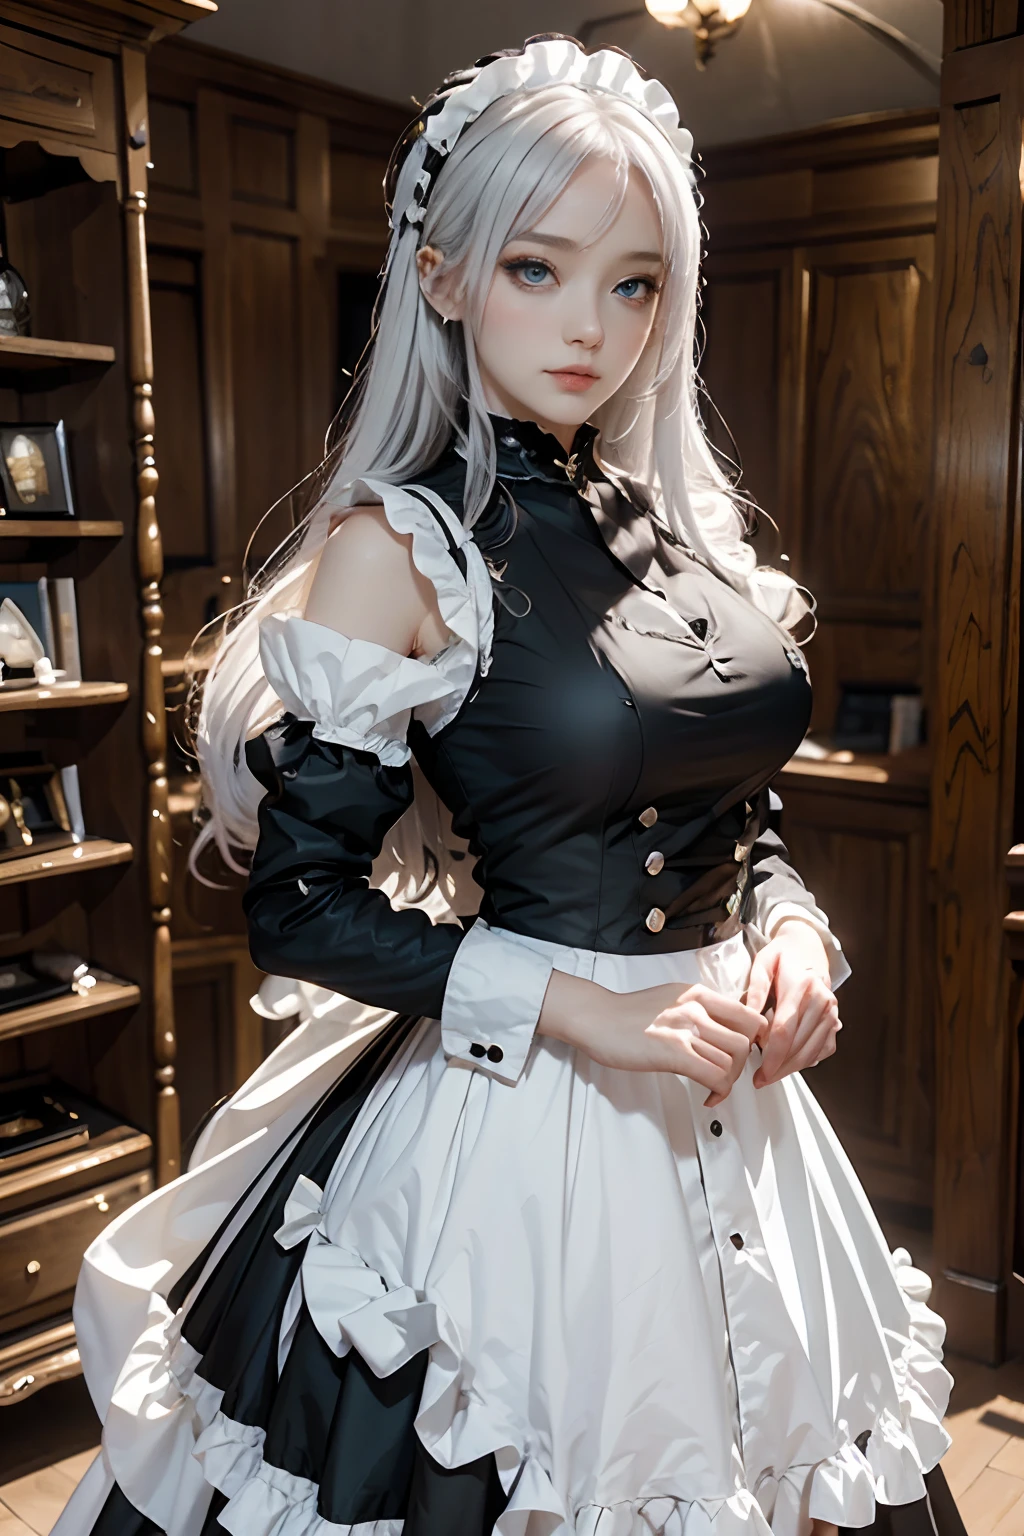 The woman, (European Citizenship: 1.2) In a black and white outfit posing for a photo, maiden! Dress, Anime Girl Cosplay, anime girl in a maid costume, The Magnificent Maiden, maid outfit, cosplay photo, cosplay, anime cosplay, A Few Cute Poses, Заманчивый портрет Marvel's Storm (snow-white hair!), (Face of the Goddess), (Elegant posture: 1.4), Elegant atmosphere, Noble atmosphere, (Milf: 1.6) (Shiny bright white hair: 1.5), (Cyan eyes: 1.4), (maidservant: 1.4), (Black and White Maid Outfit: 1.1), (Incredible beauty, High facial detail:1.3),